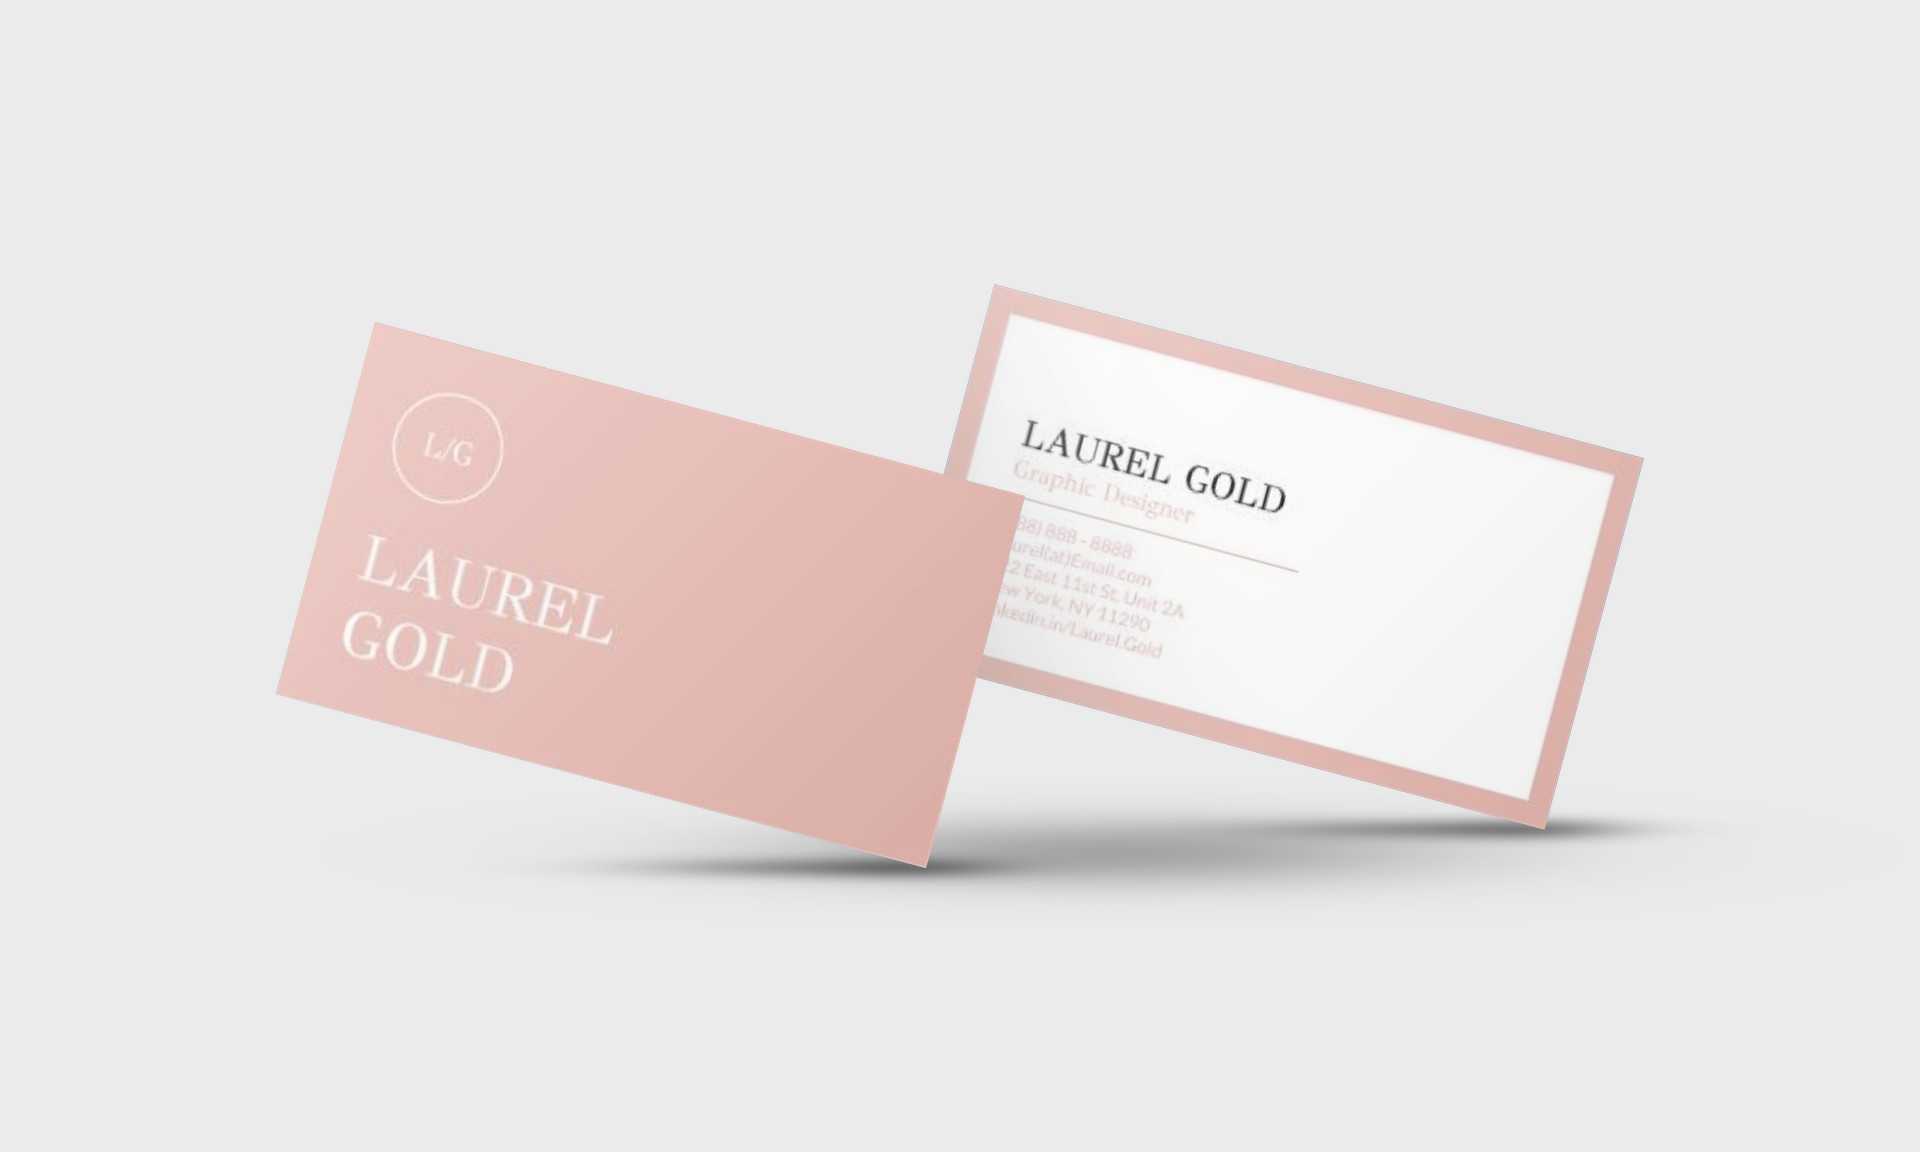 Laurel Gold Google Docs Business Card Template - Stand Out Shop Intended For Business Card Template For Google Docs